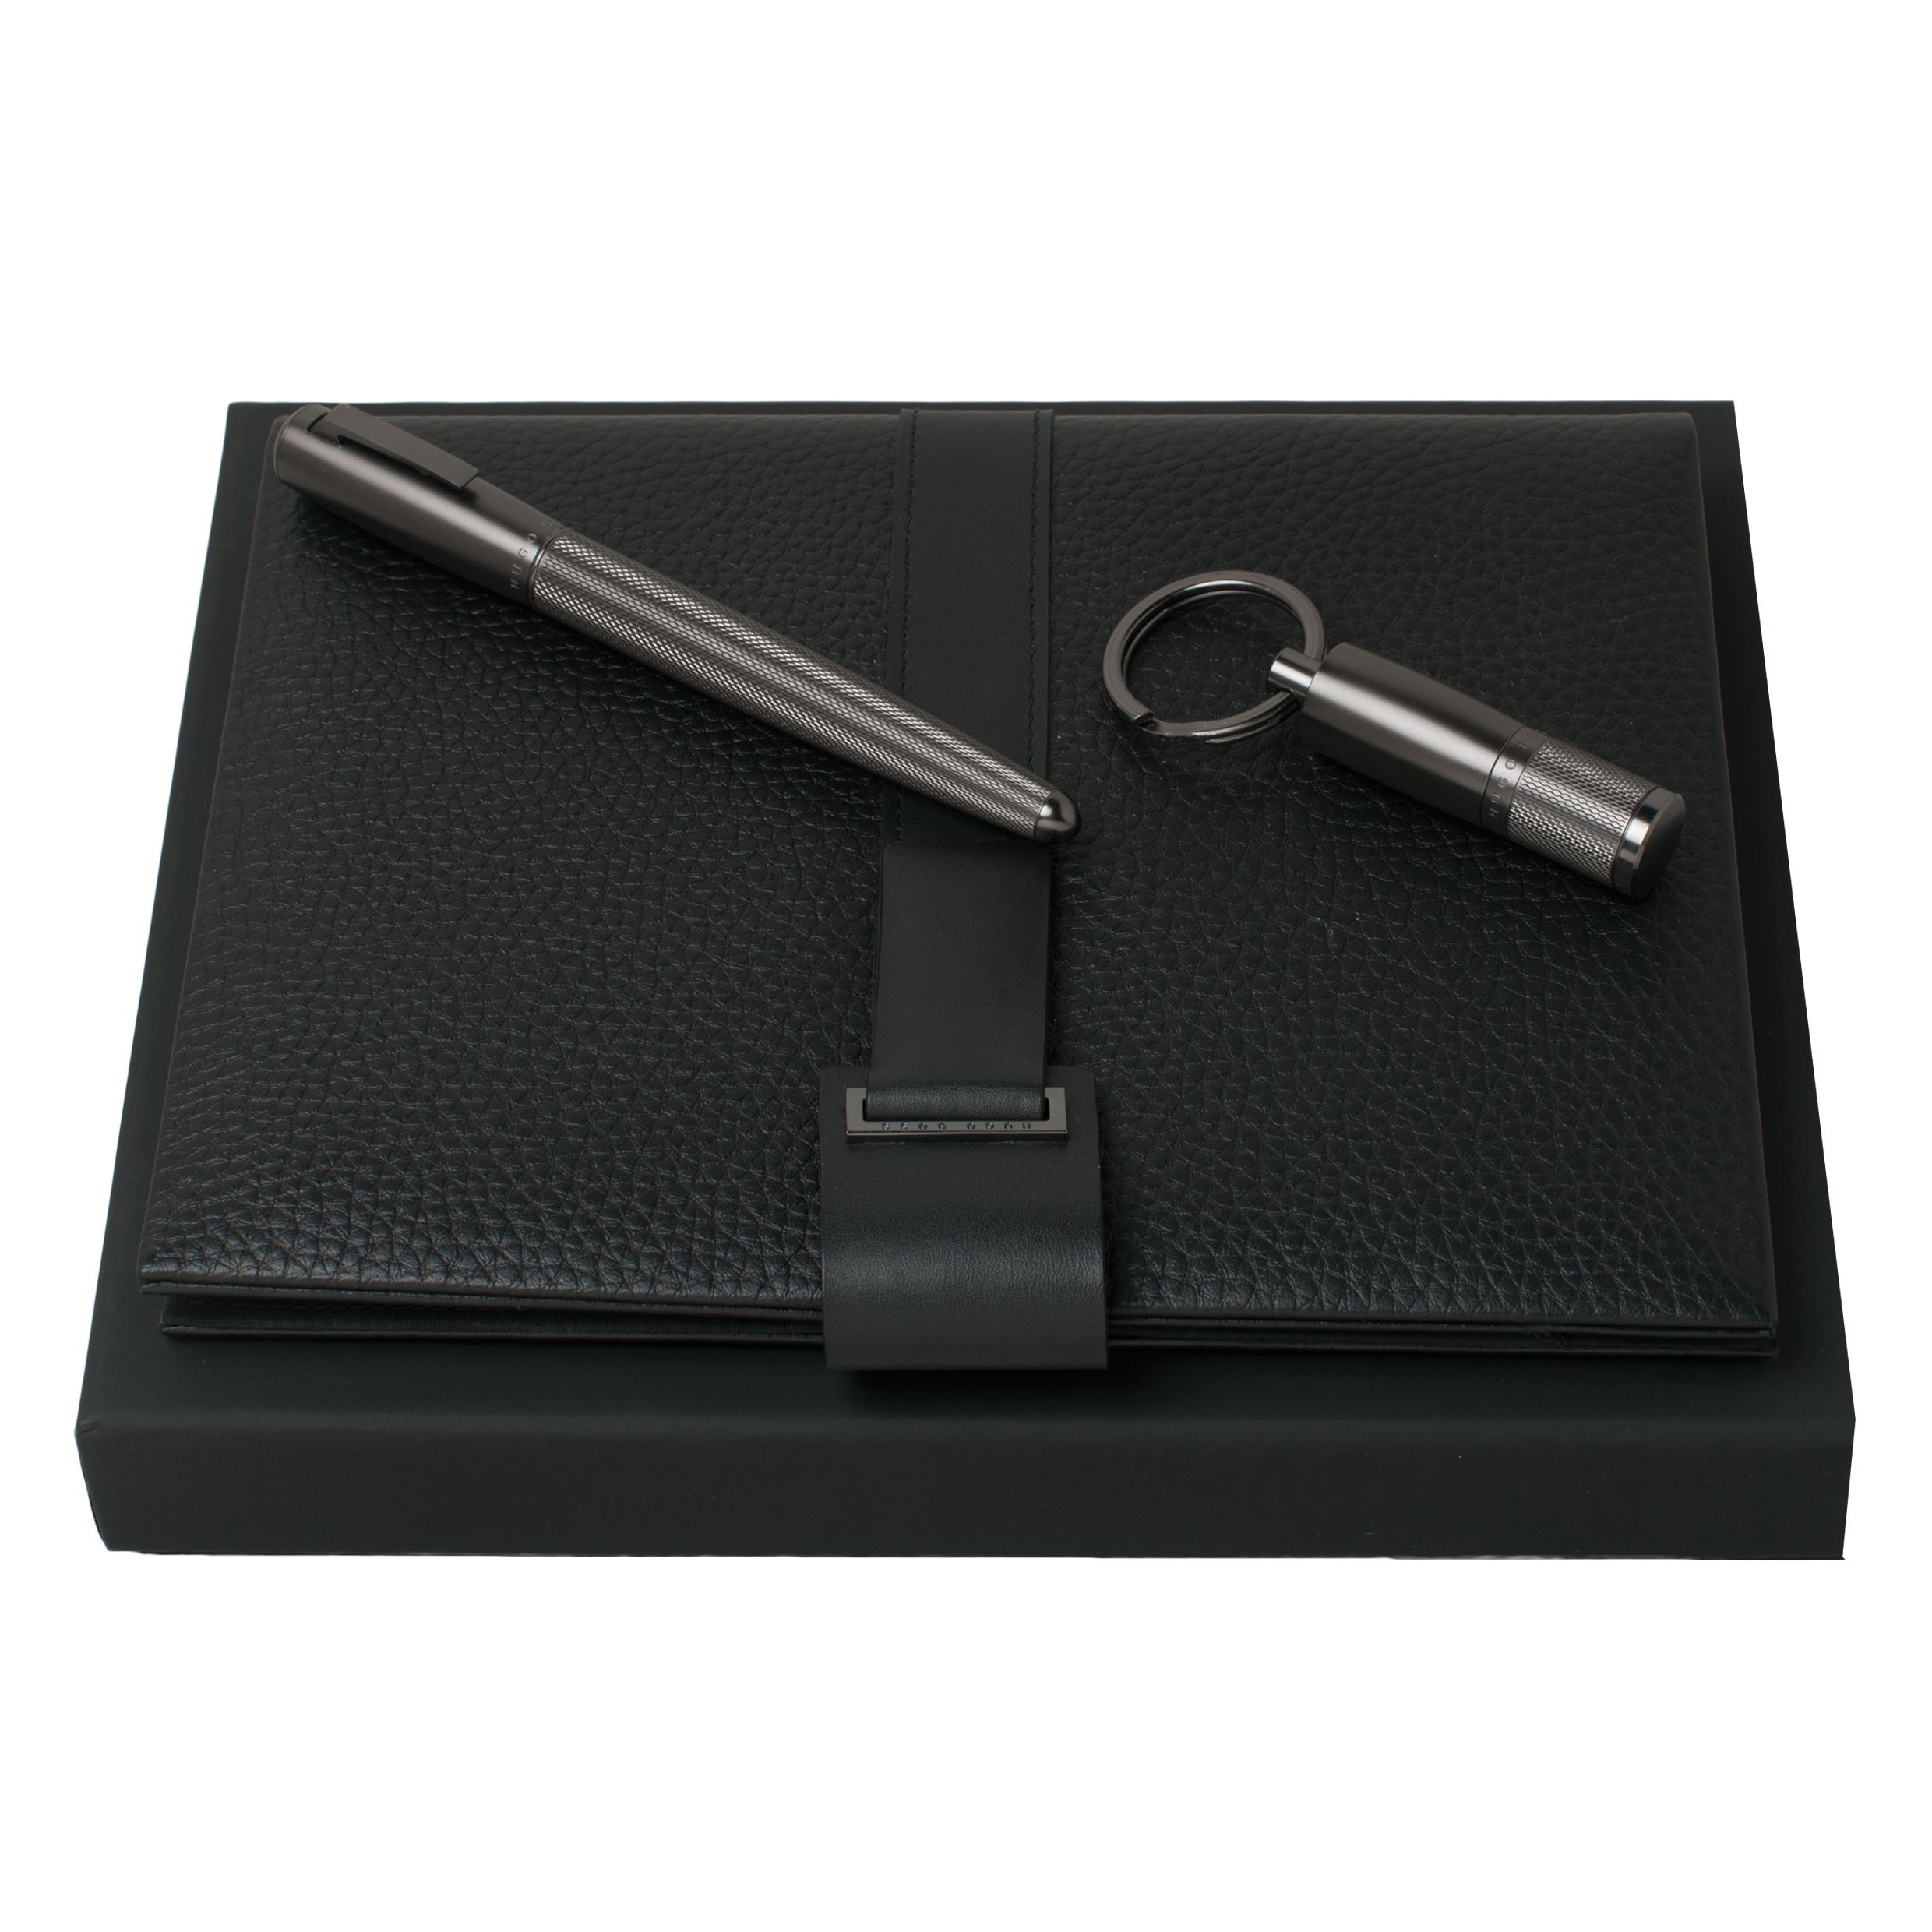 A5 Textured Leather Folder with Rollerball Pen and USB Keyring